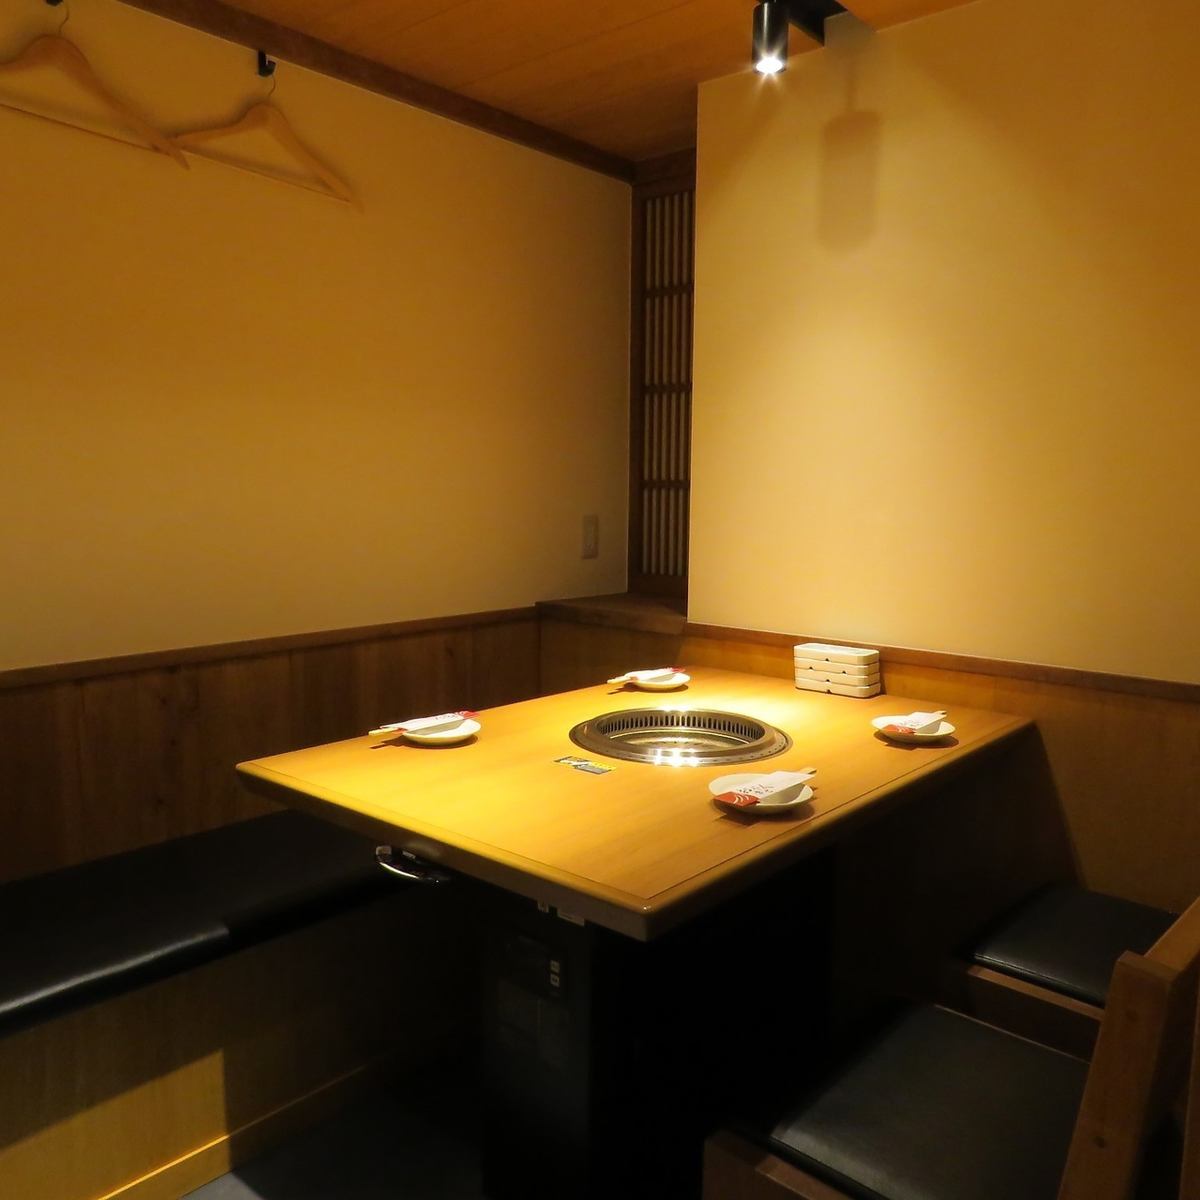 We have private rooms available for small groups! [Yakiniku Oniku Happiness]